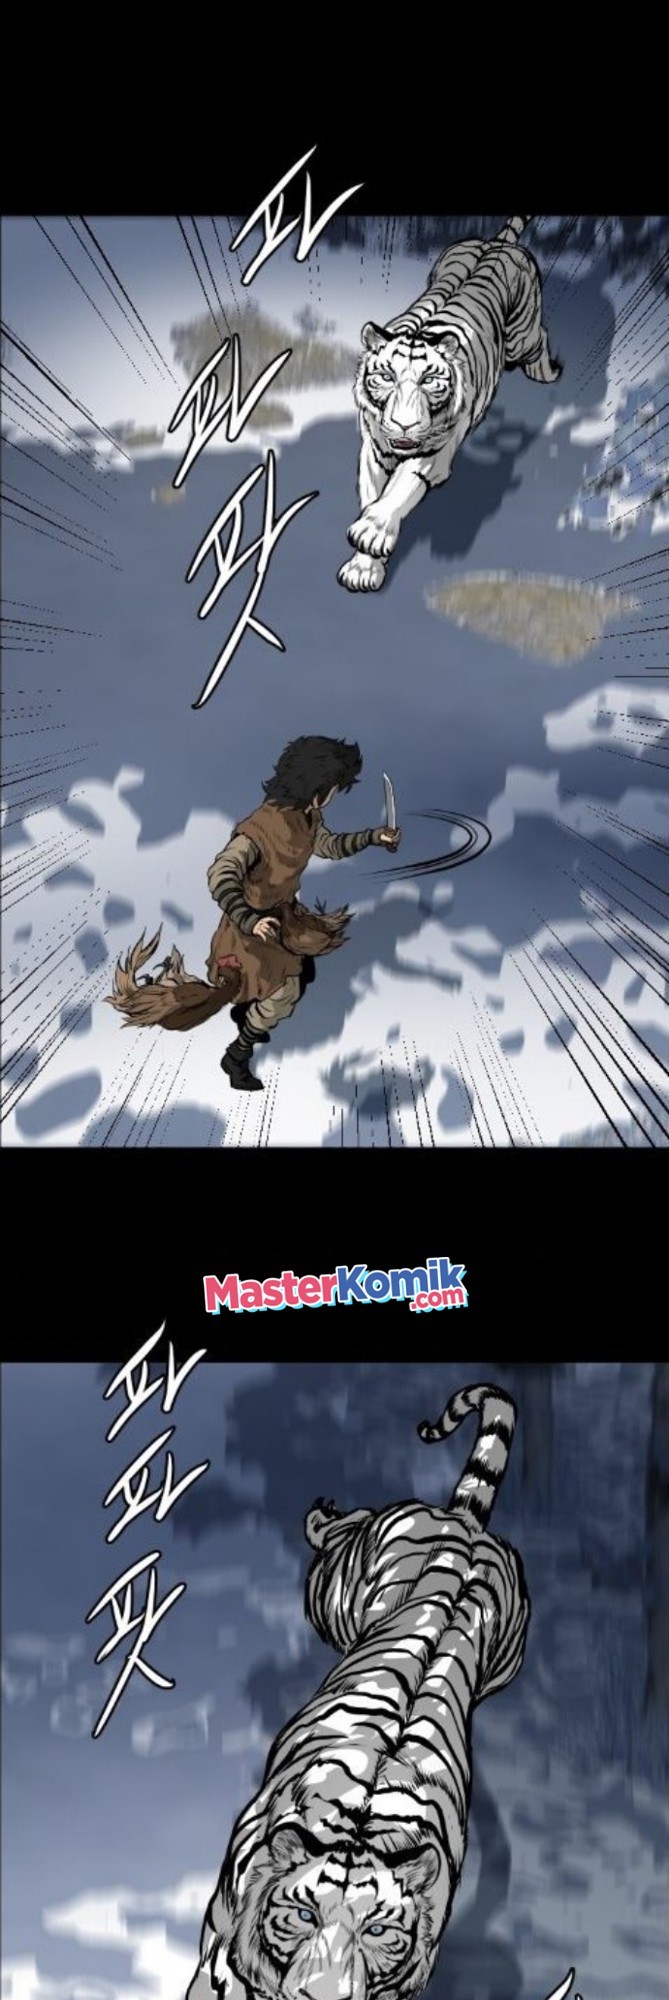 Blade of Winds and Thunders Chapter 07